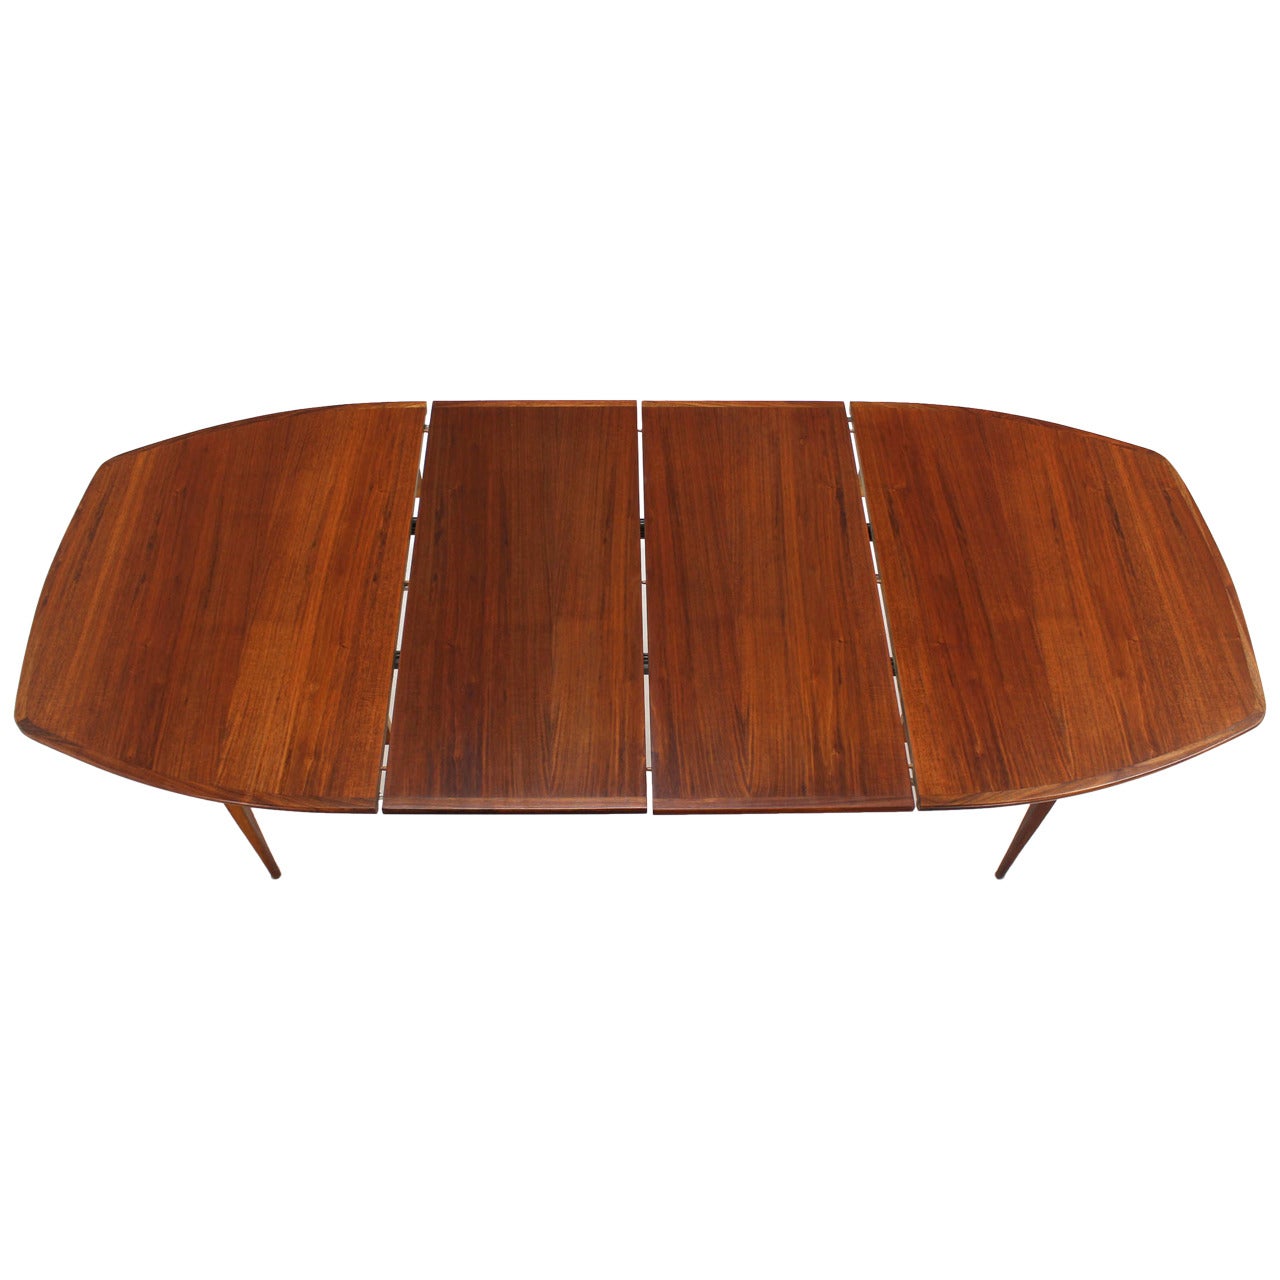 Oiled Walnut Dining Table with Two Extension Board Leaves